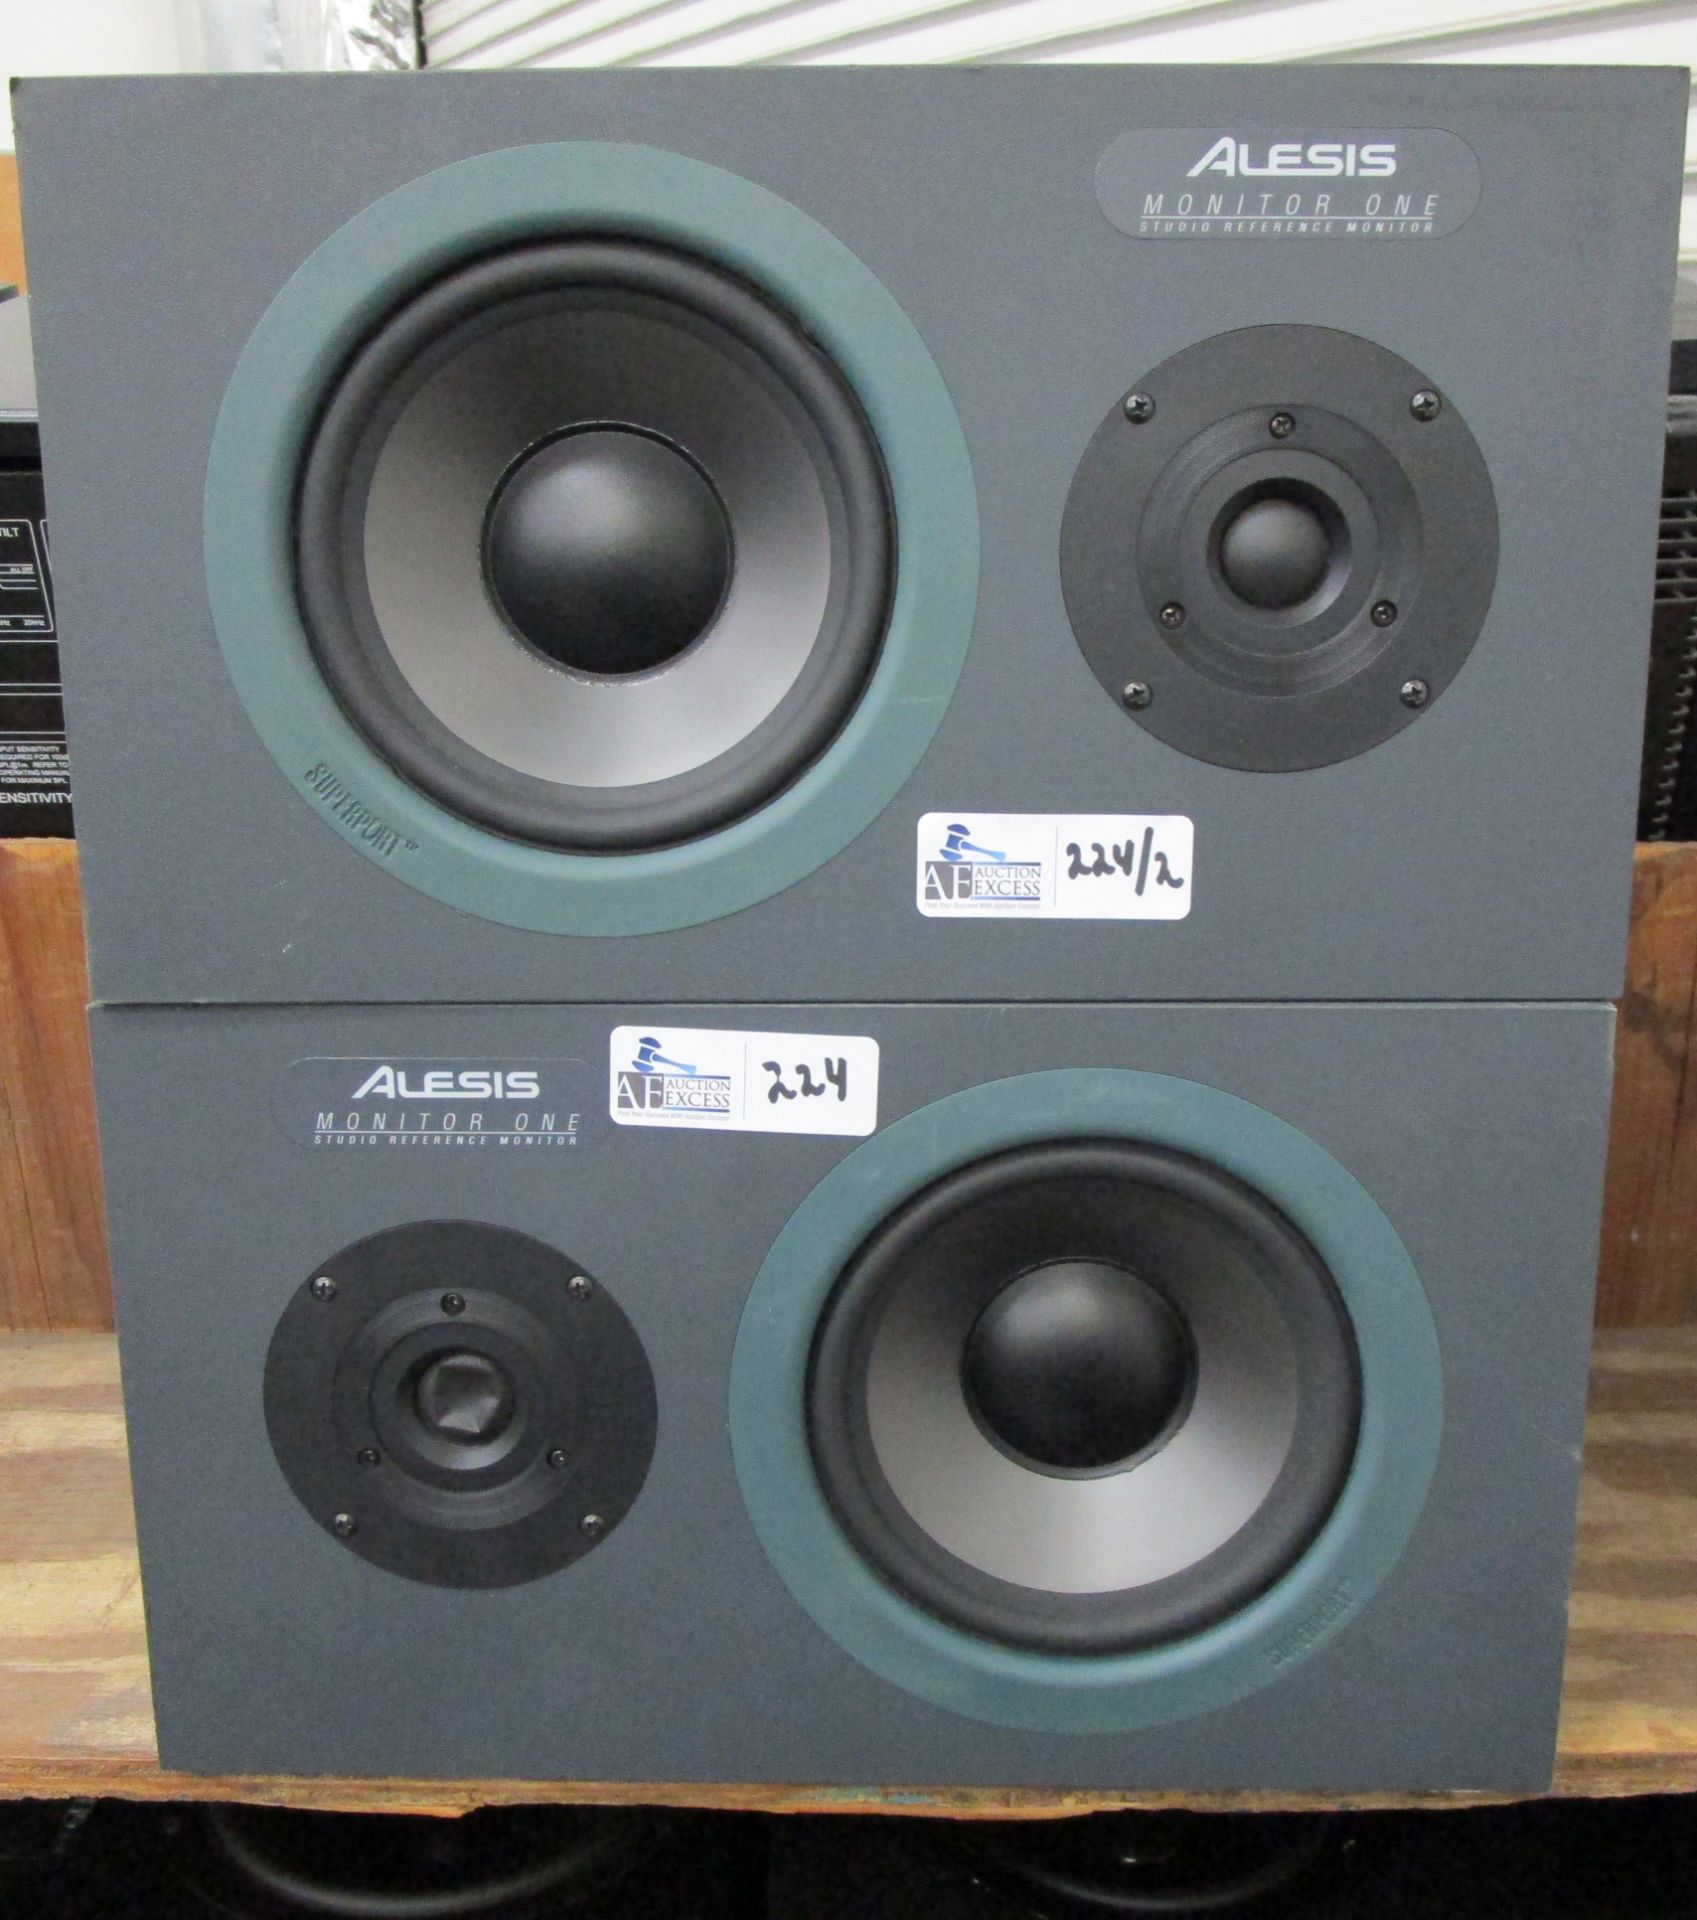 LOT OF 2 ALESIS MONITOR ONE SPEAKERS